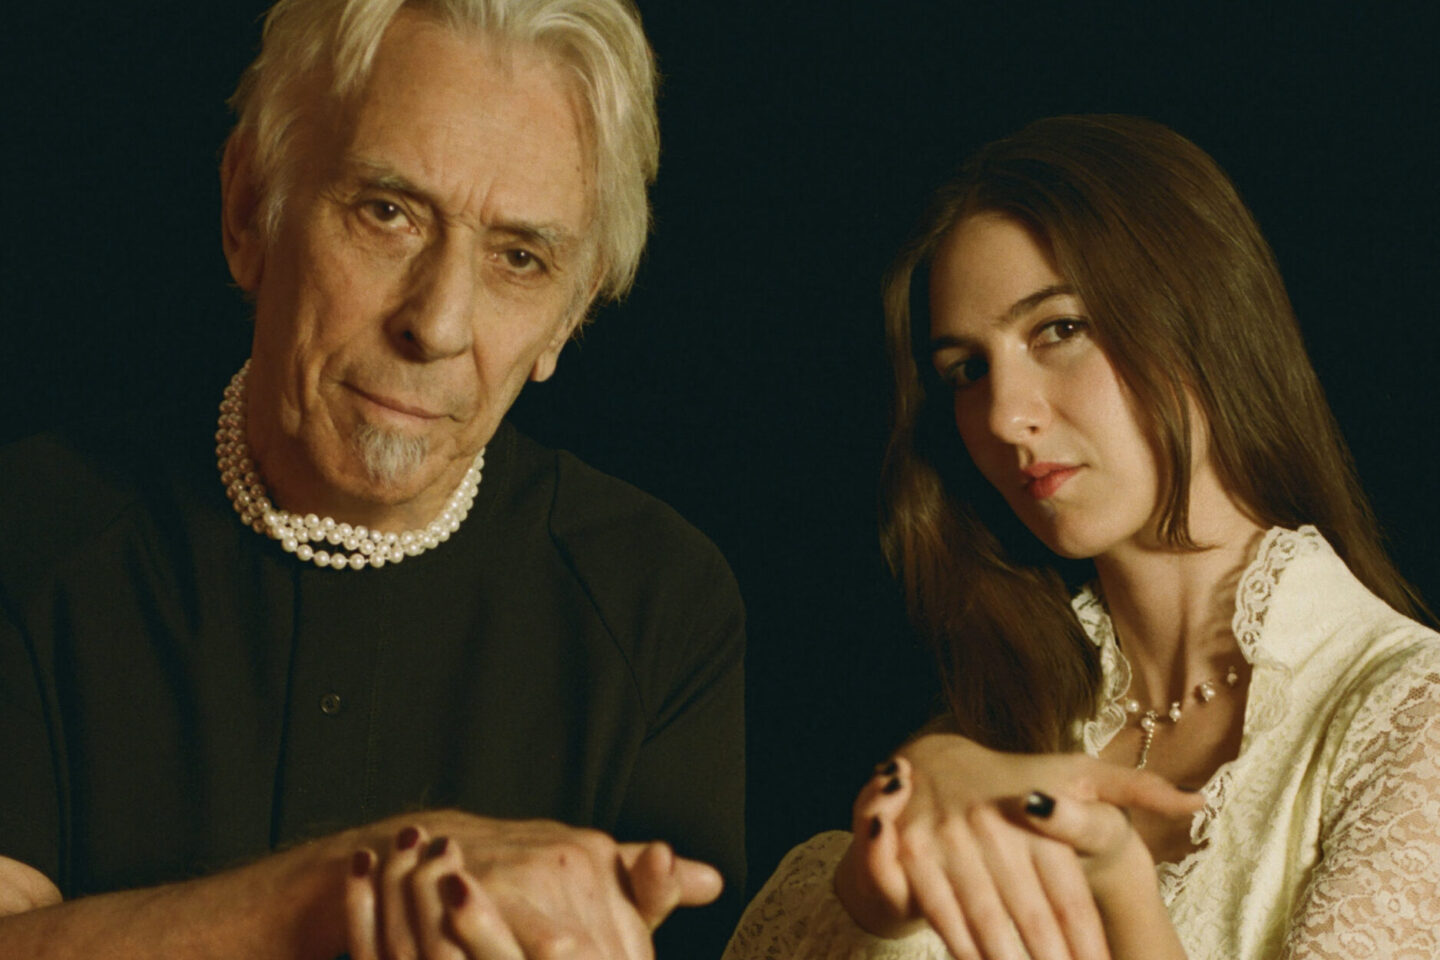 John Cale and Weyes Blood